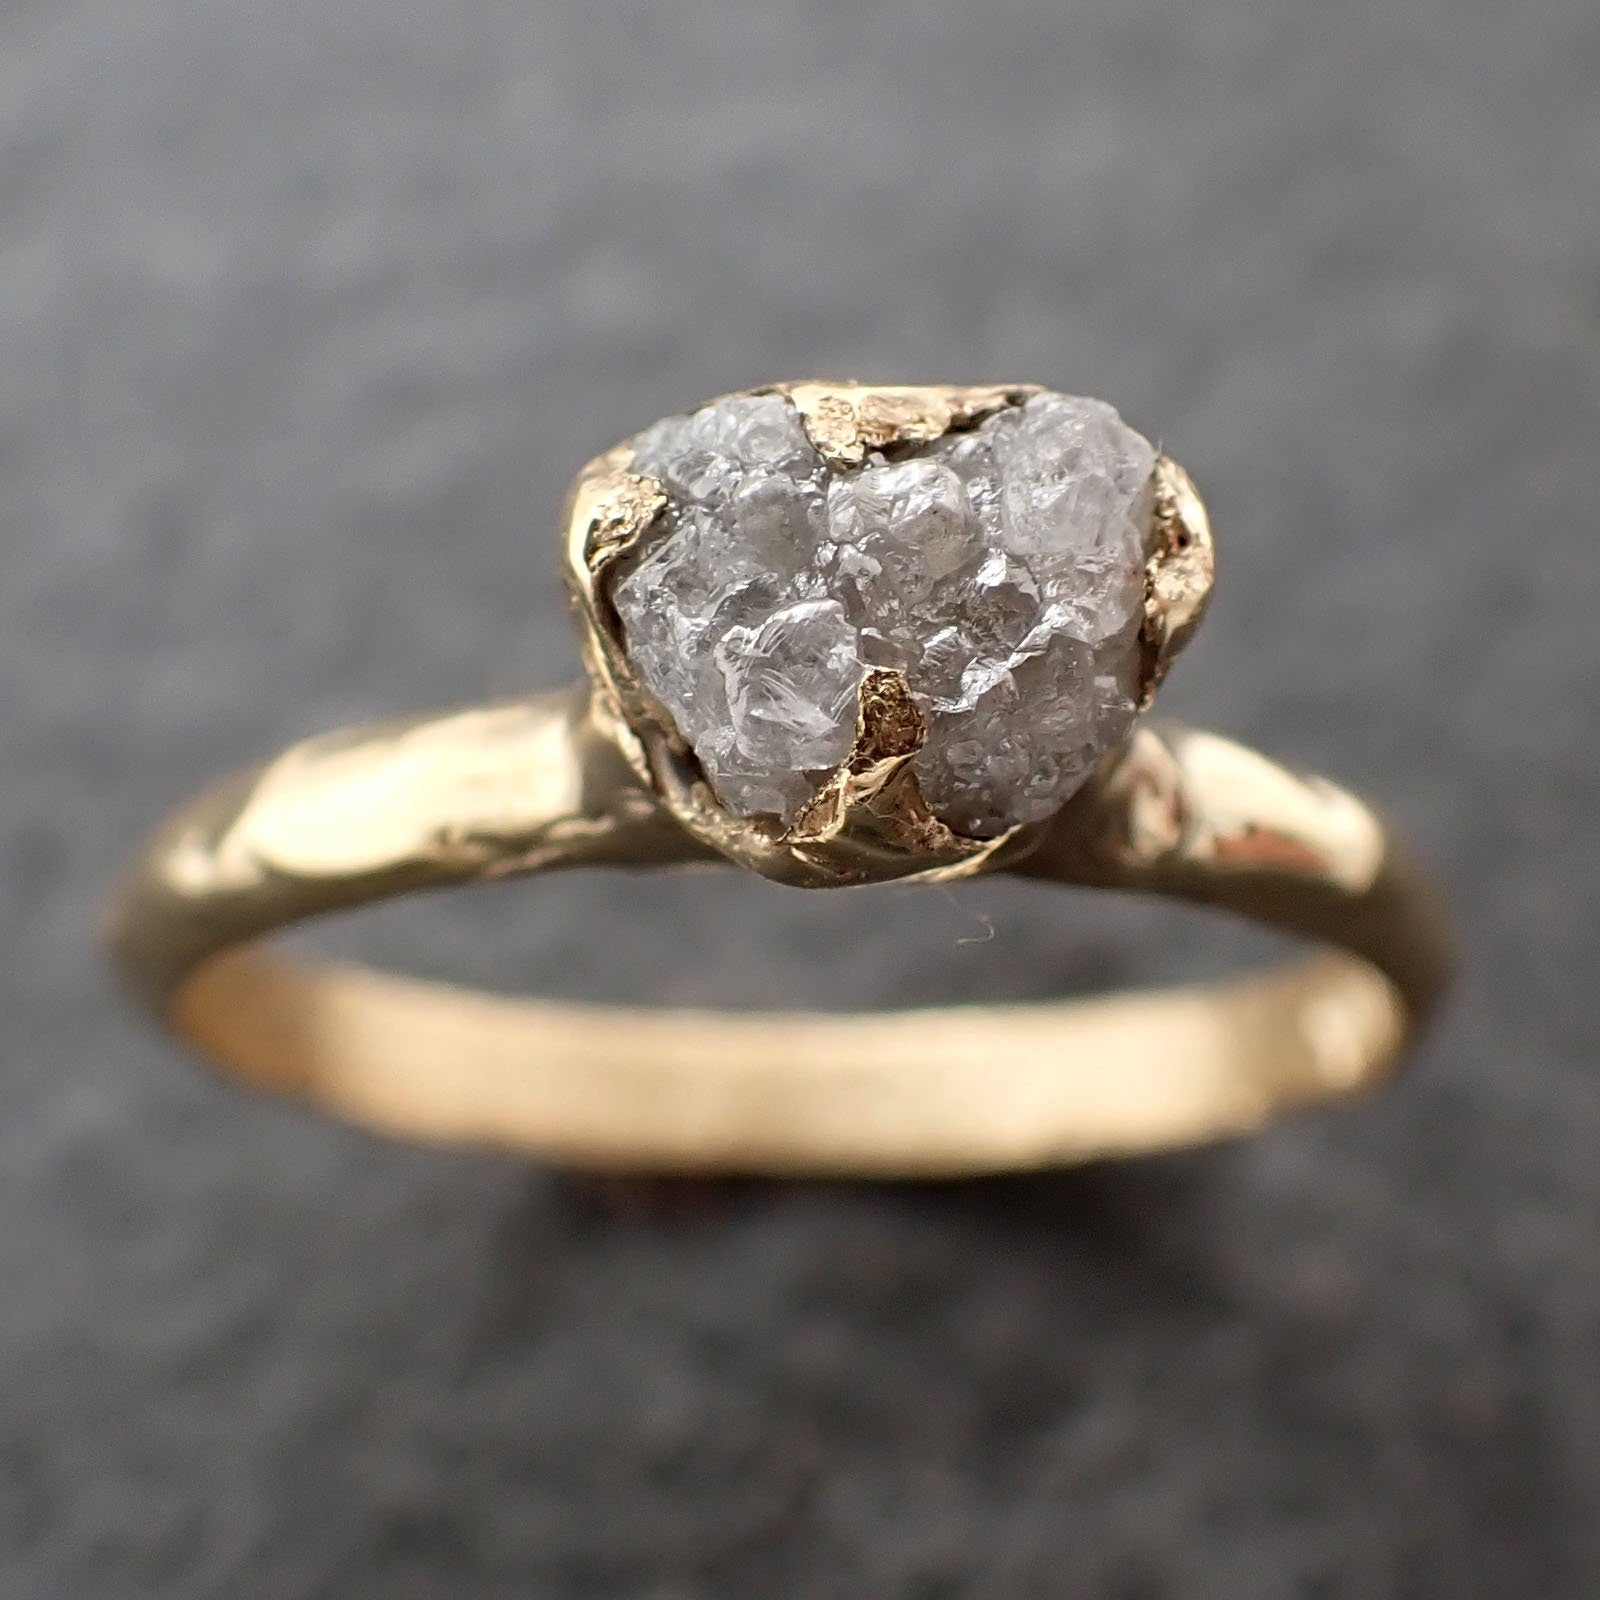 Large Raw Rough Diamond on Recycled Gold Band Custom Made 